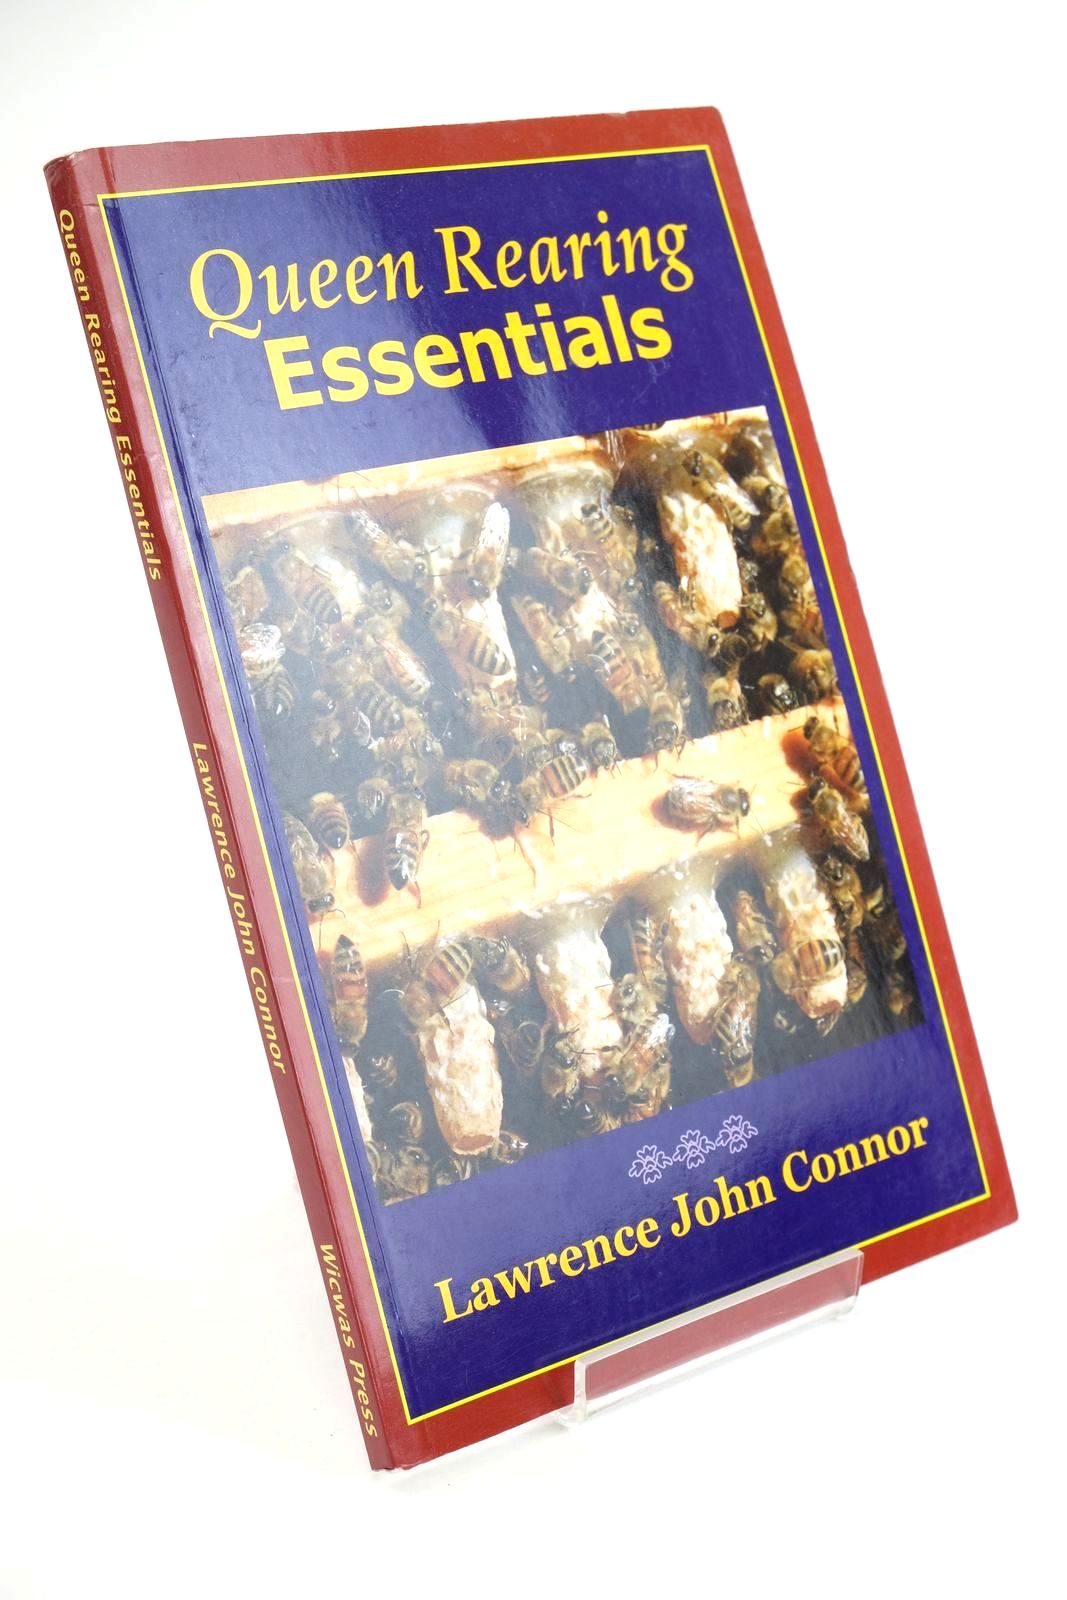 Photo of QUEEN REARING ESSENTIALS written by Connor, Lawrence John published by Wicwas Press (STOCK CODE: 1324007)  for sale by Stella & Rose's Books